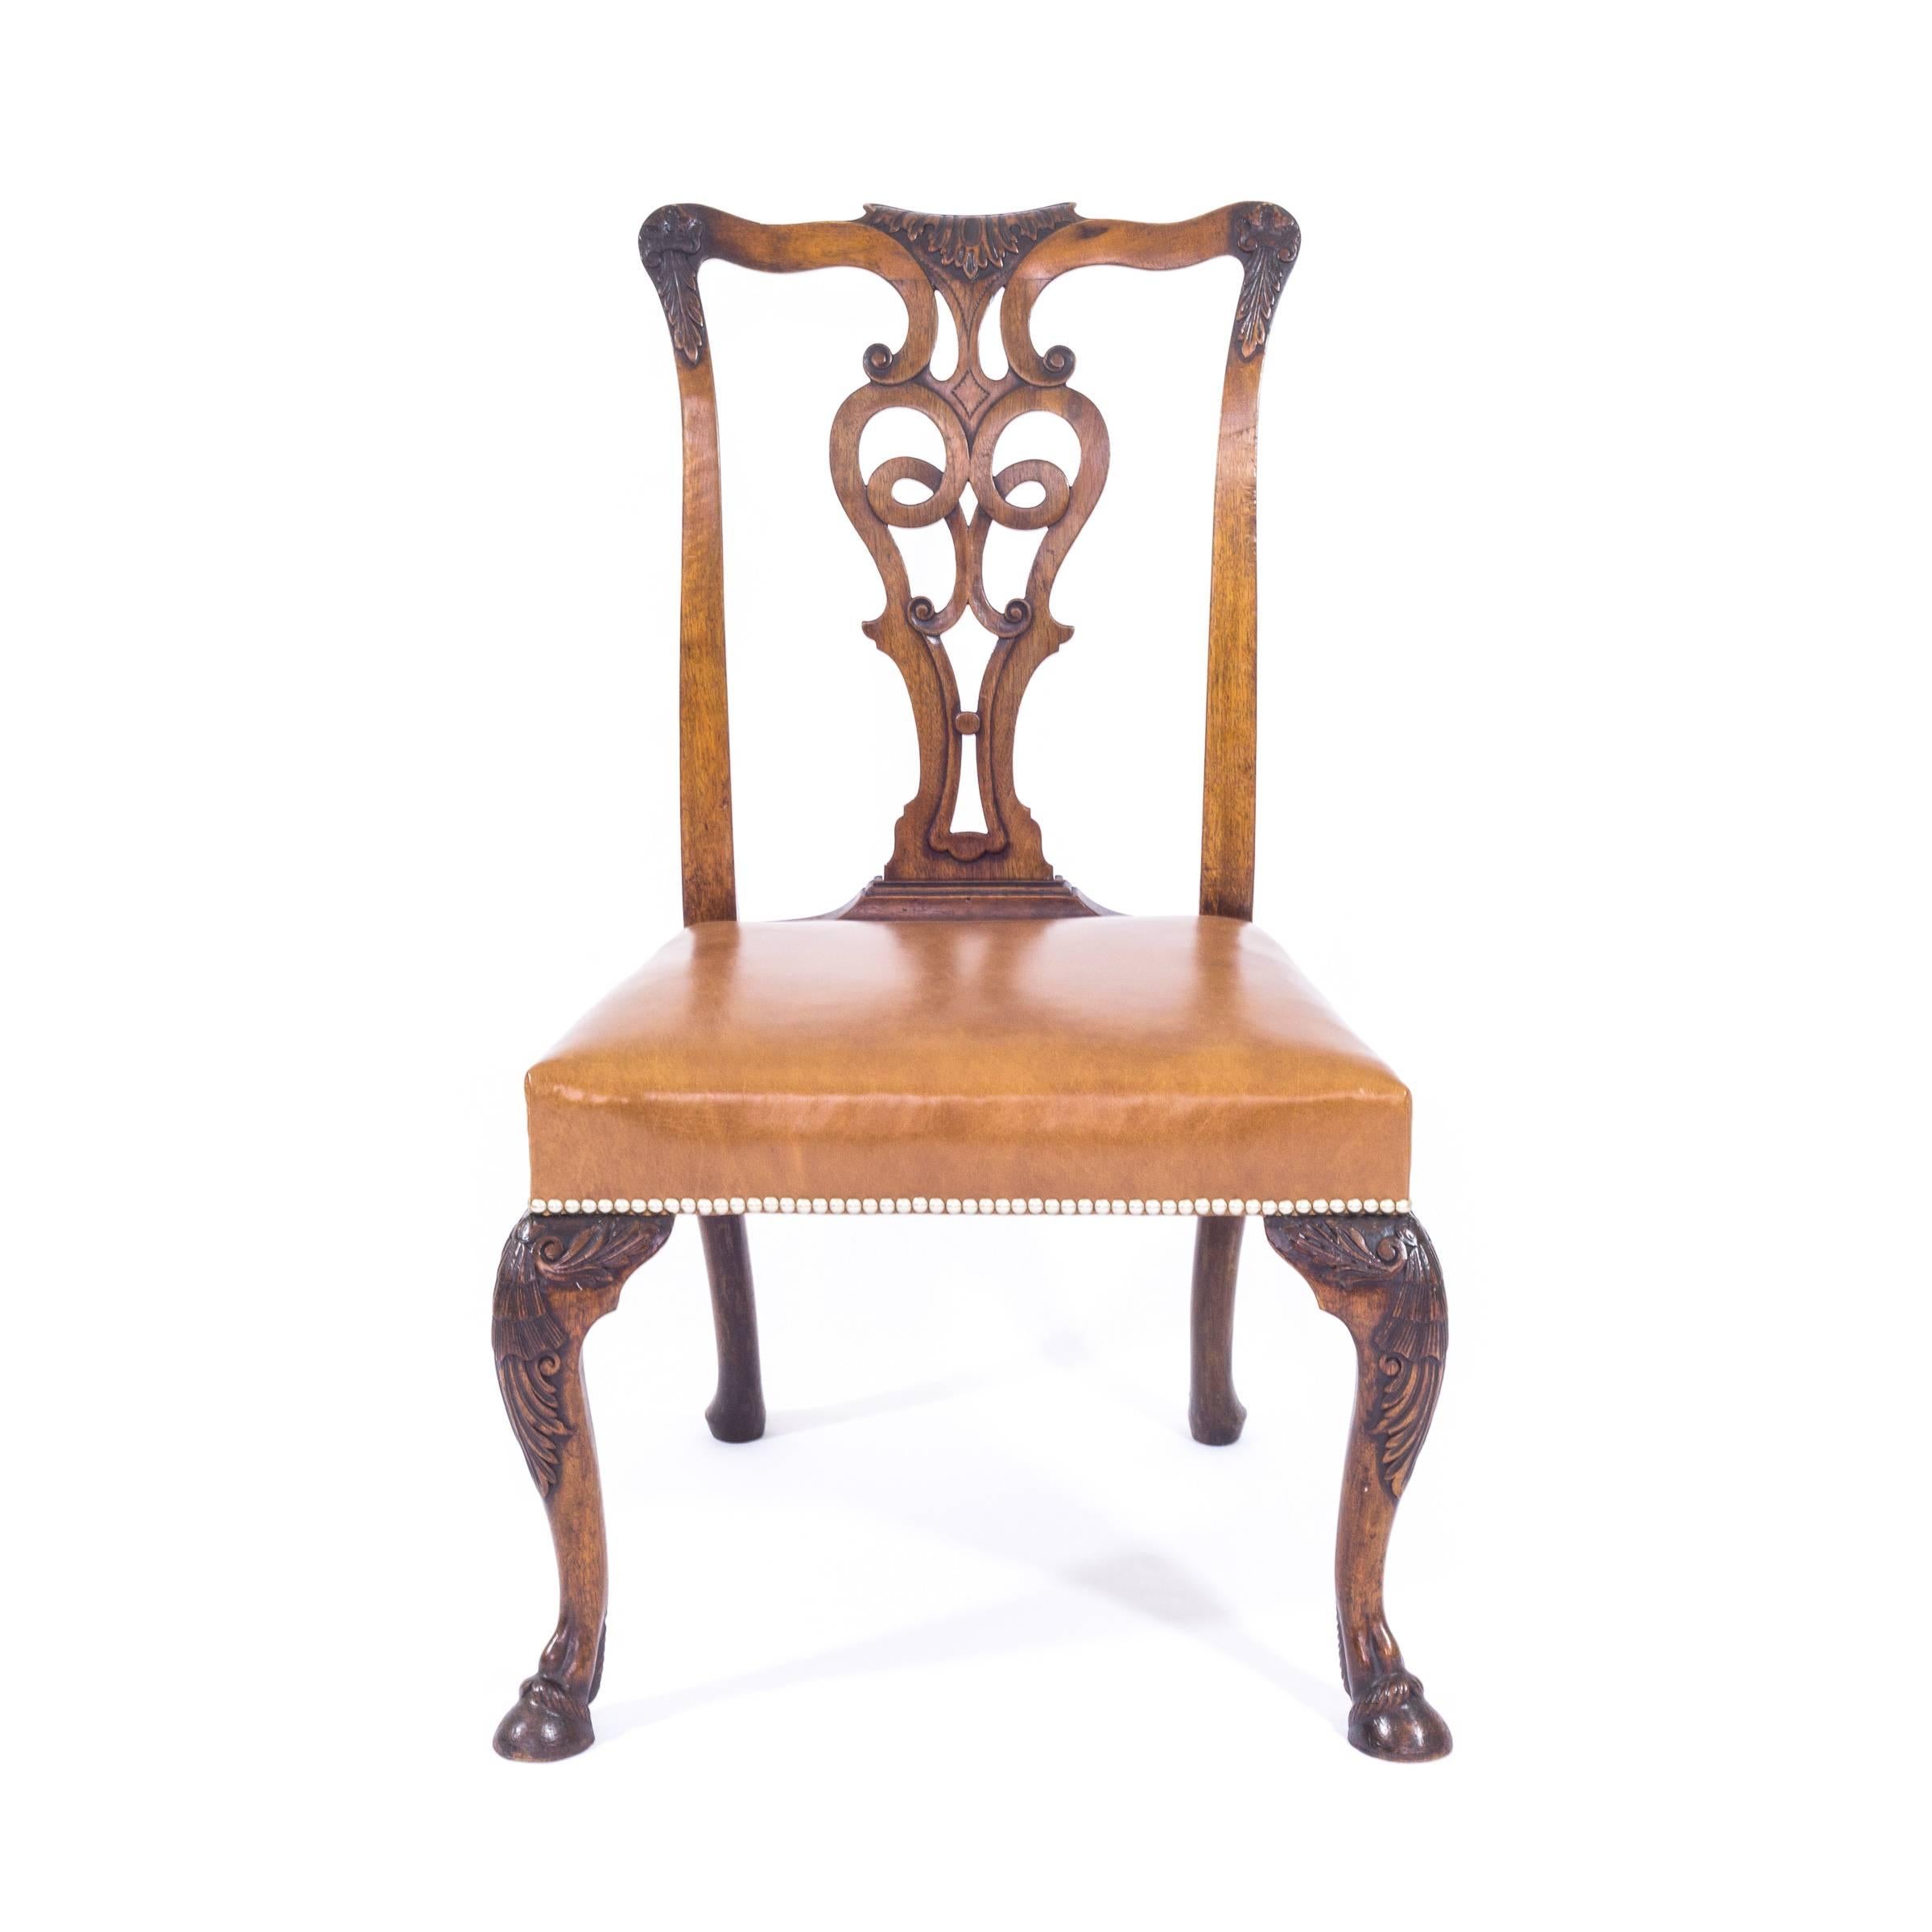 Unlike the majority of mass-produced Georgian revival chairs, this bespoke set was commissioned by Lord Rufus Daniel Isaacs, the Viceroy of India in 1921-1926. Copied to match the original mid-18th century Irish chairs, this exceptional set stands